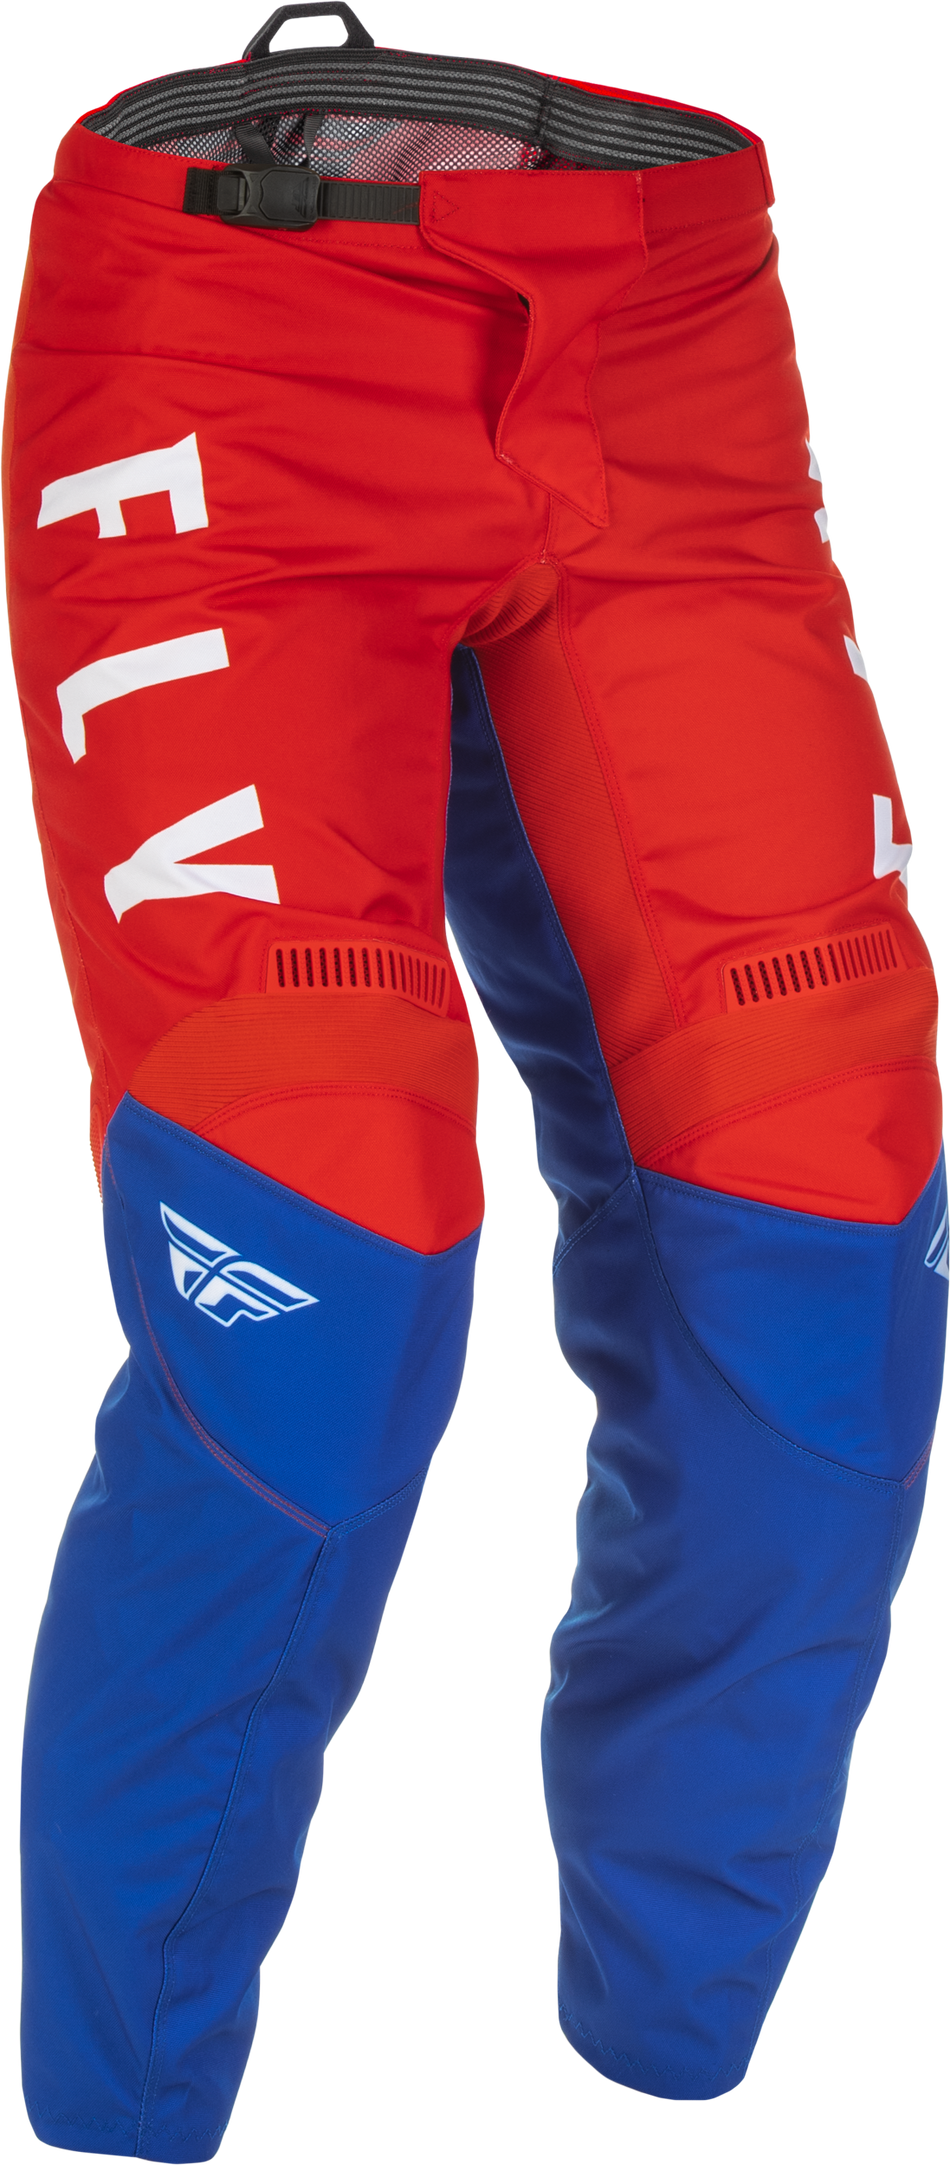 FLY RACING F-16 Pants Red/White/Blue Sz 34 375-93434